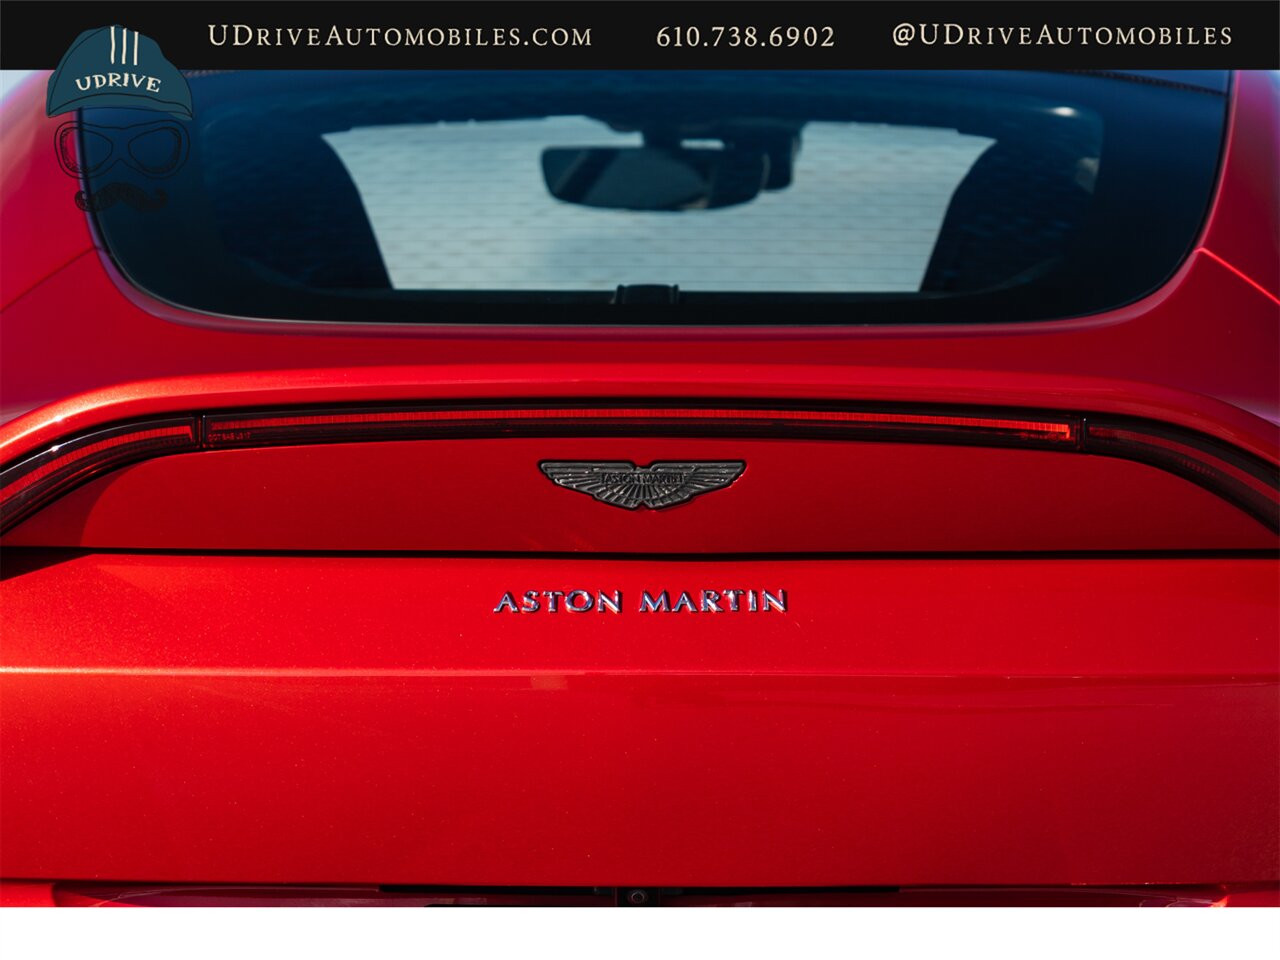 2019 Aston Martin Vantage  Incredibly Spec Rare Q Exclusive Fiamma Red $222k MSRP 1 of a Kind CPO - Photo 25 - West Chester, PA 19382